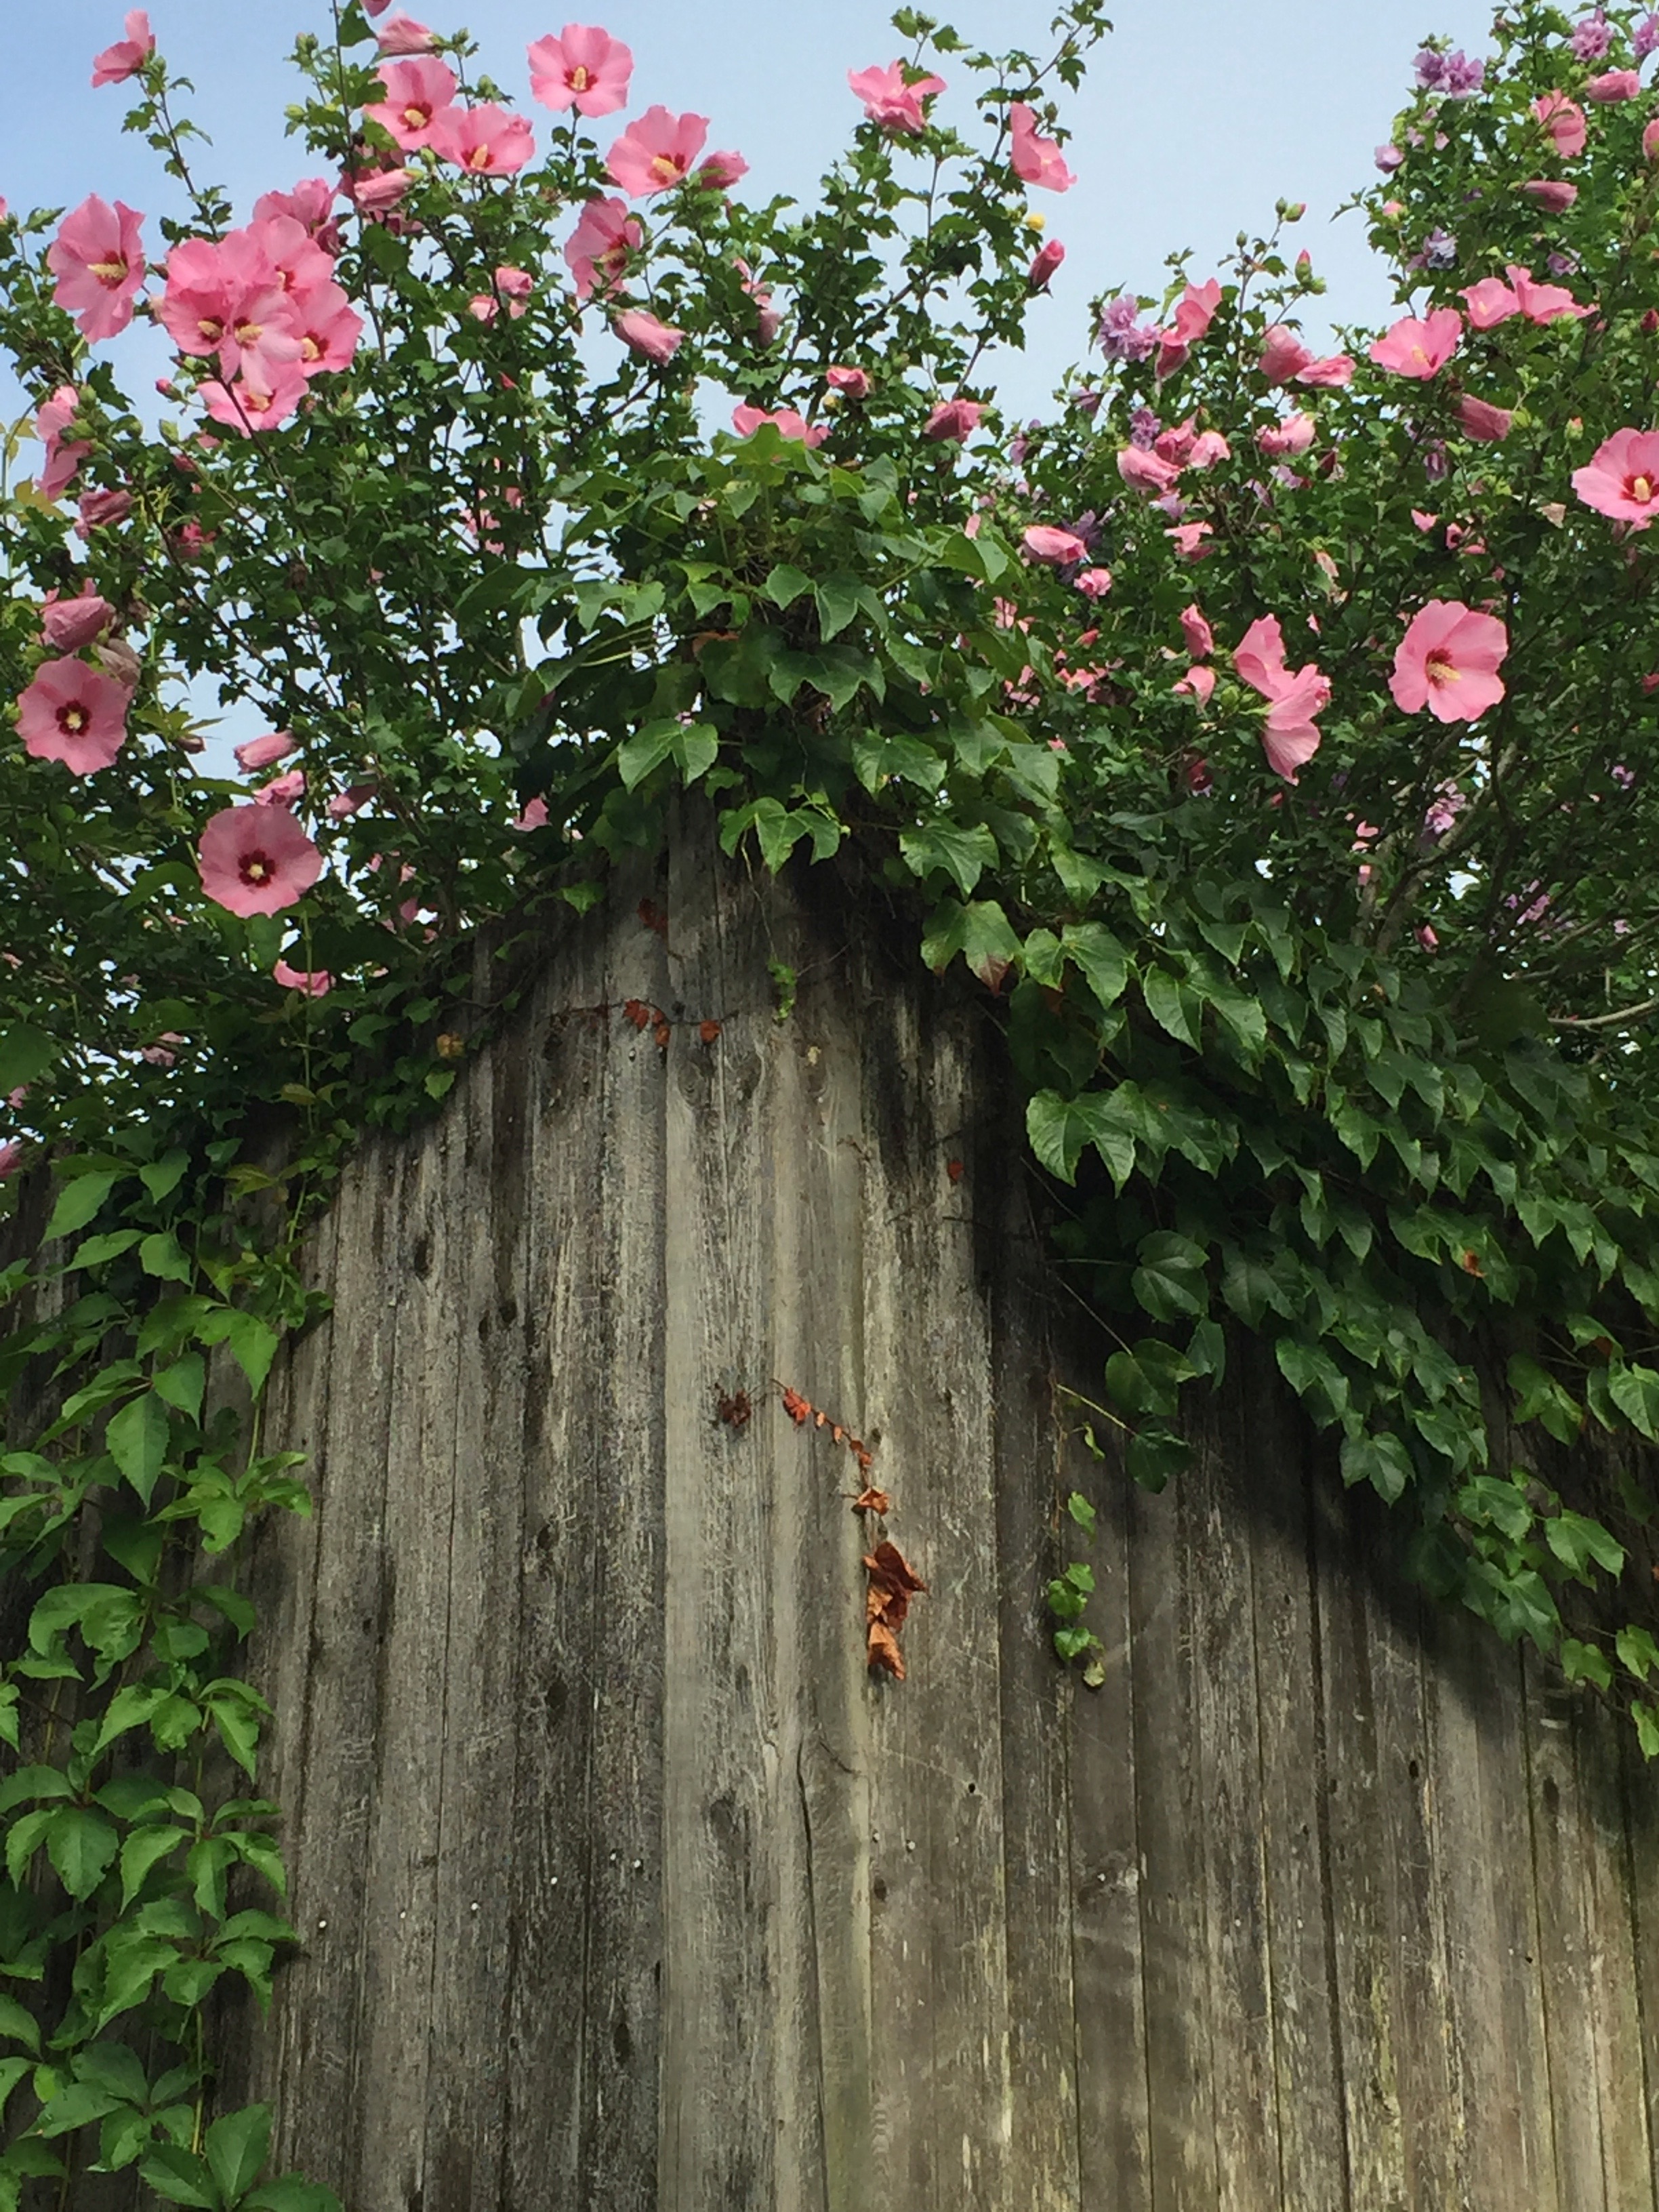 It's the Weekend, Number 68. Rose of Sharon looming high over a wood fence